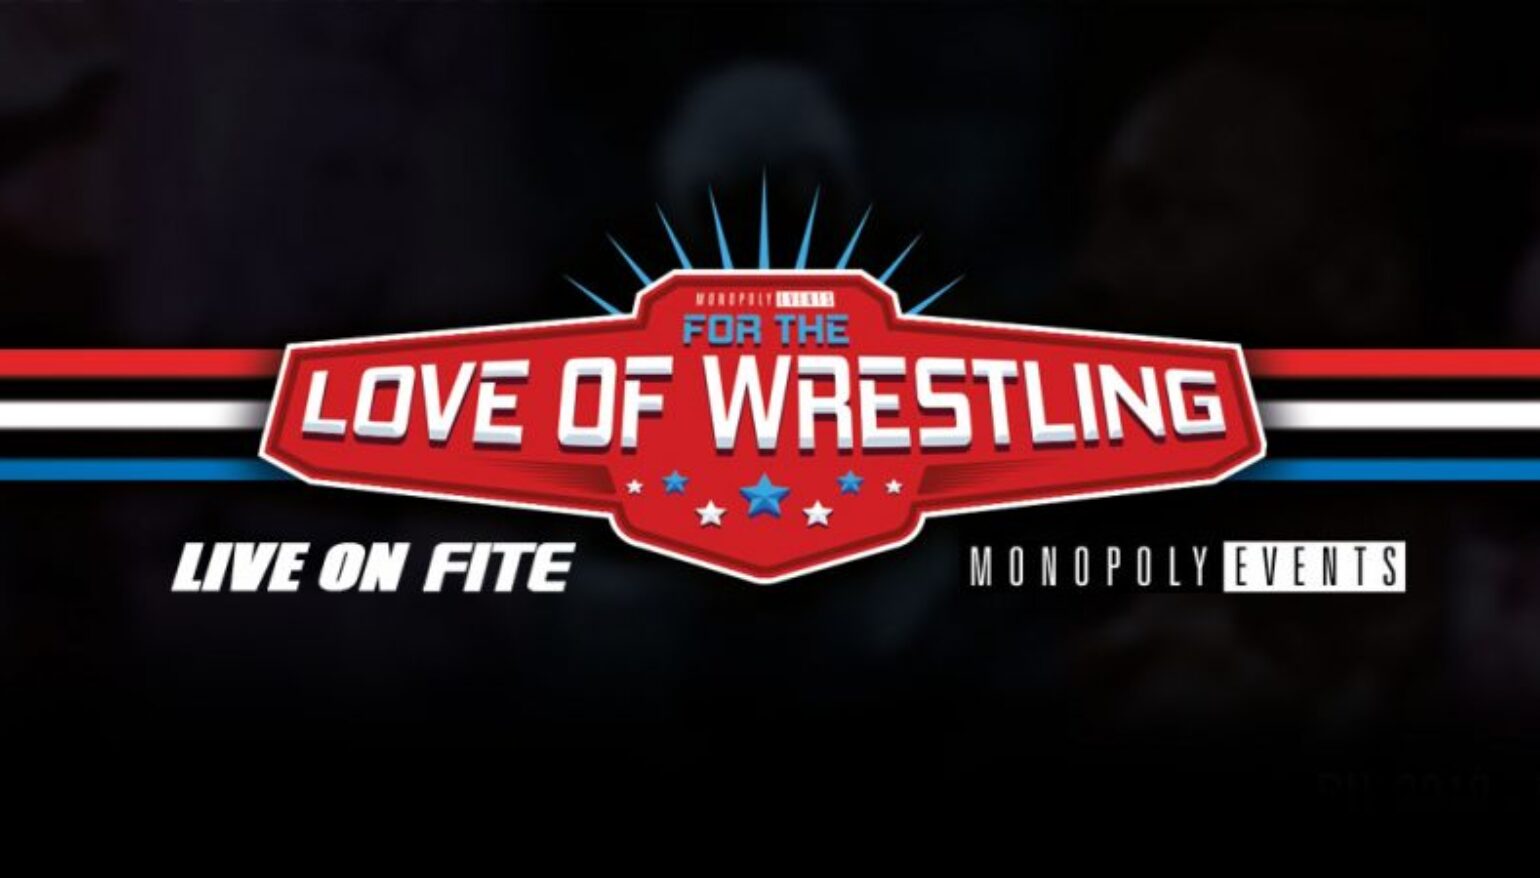 Global Force And Monopoly Events Bring ‘For The Love Of Wrestling’ To